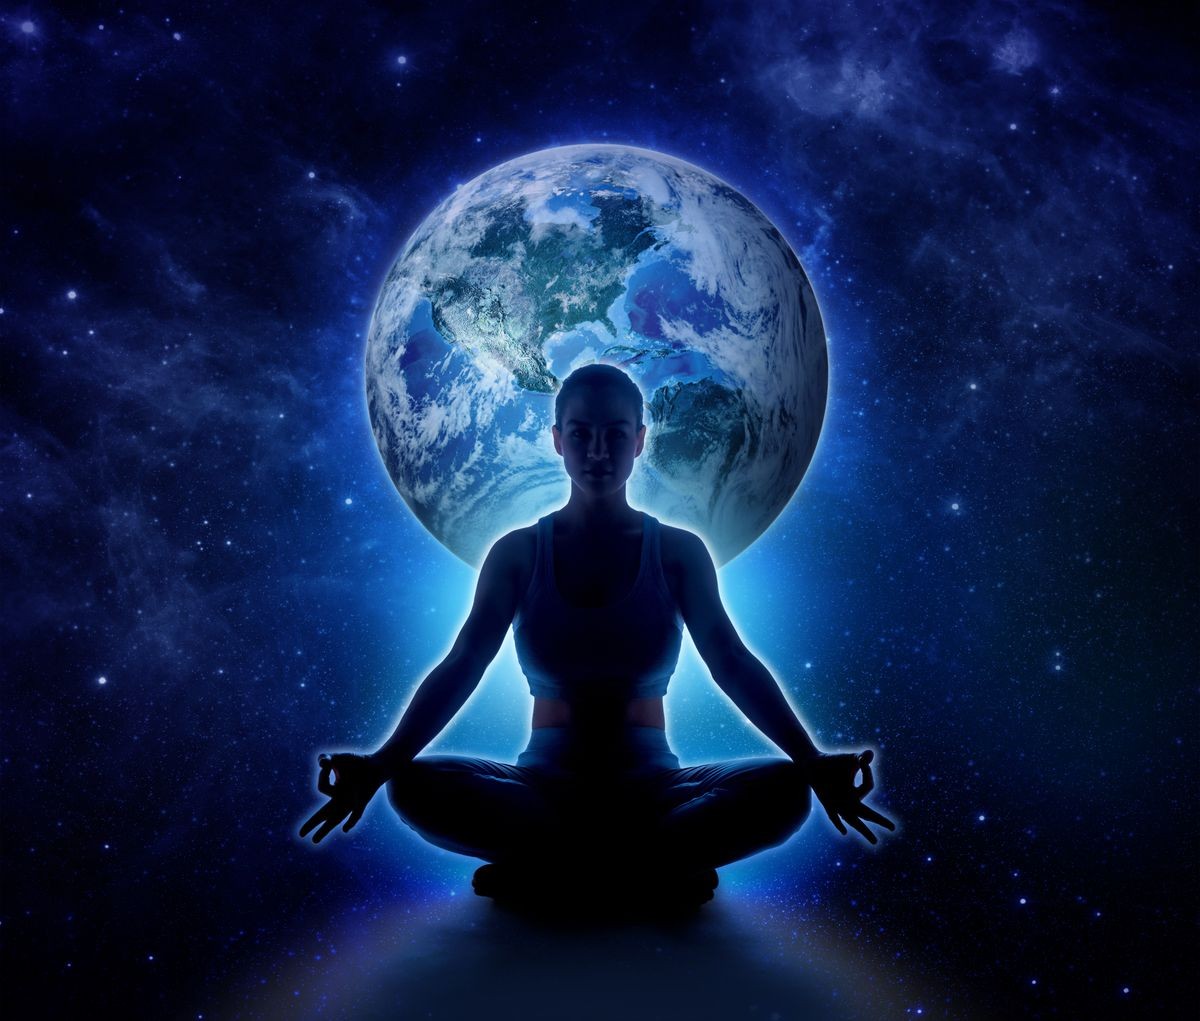 Yoga woman on the world. Meditation girl sitting in lotus pose on planet earth and star in dark night sky, Moon original image from NASA.gov